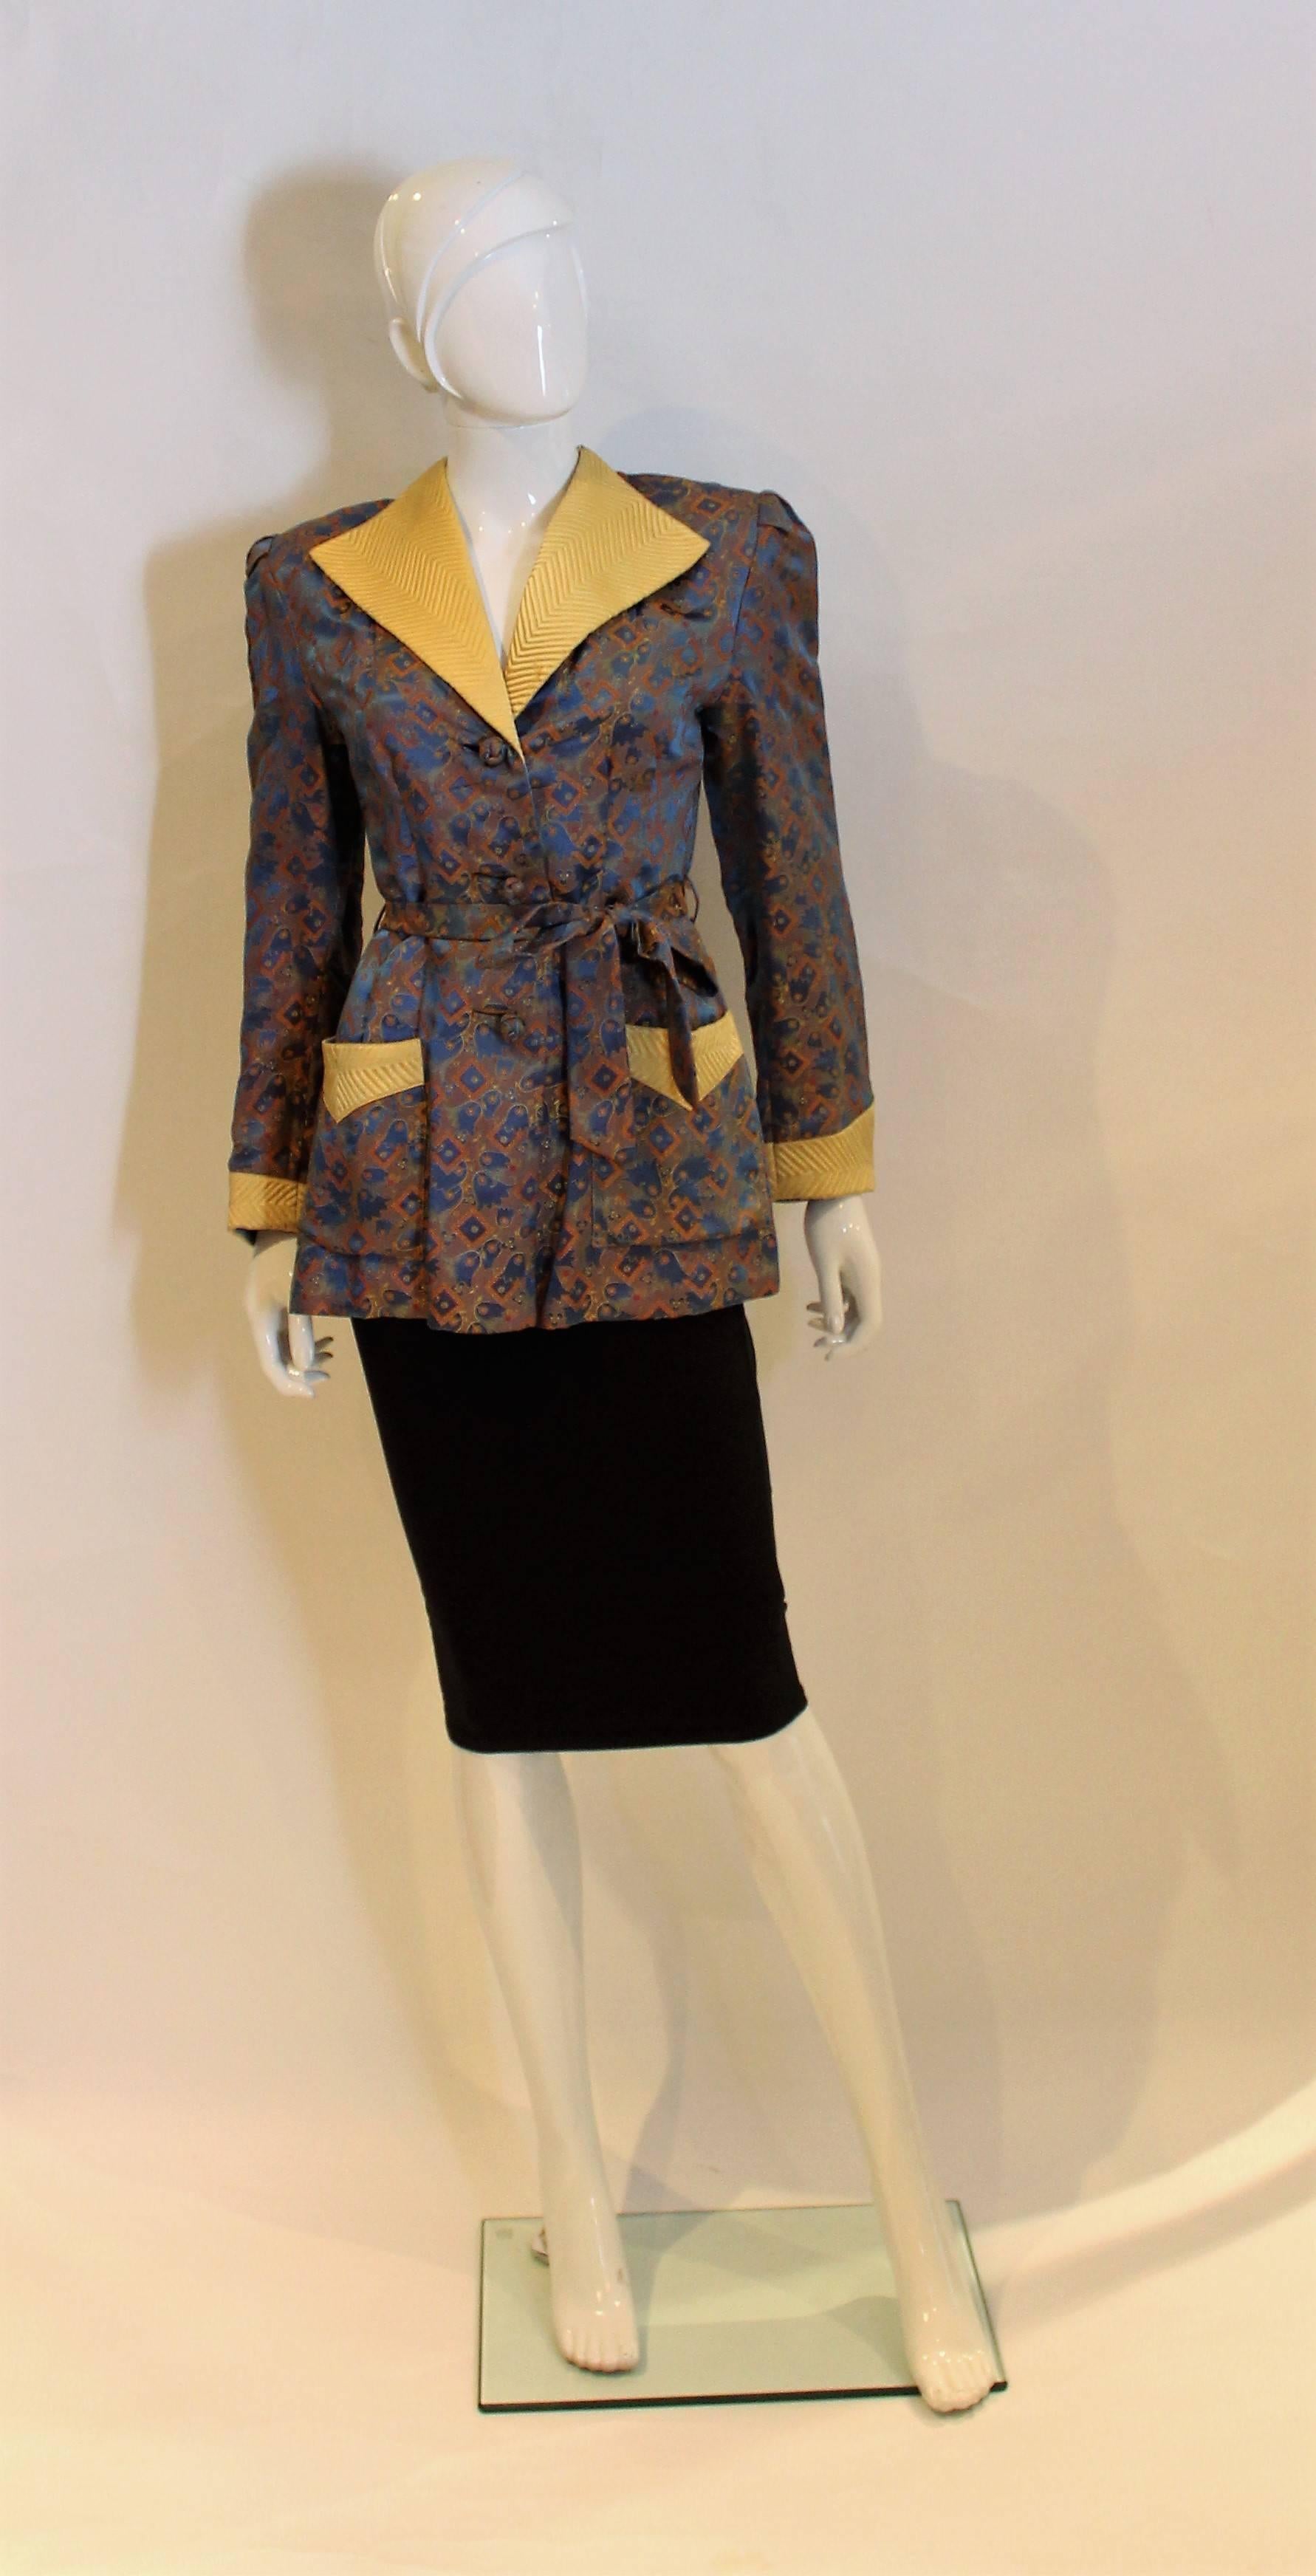 A chic Chinese Silk jacket. This jacket has gold cuffs and collar, and pocket detail.It opens with three silk knot buttons and has a same fabric tie belt.